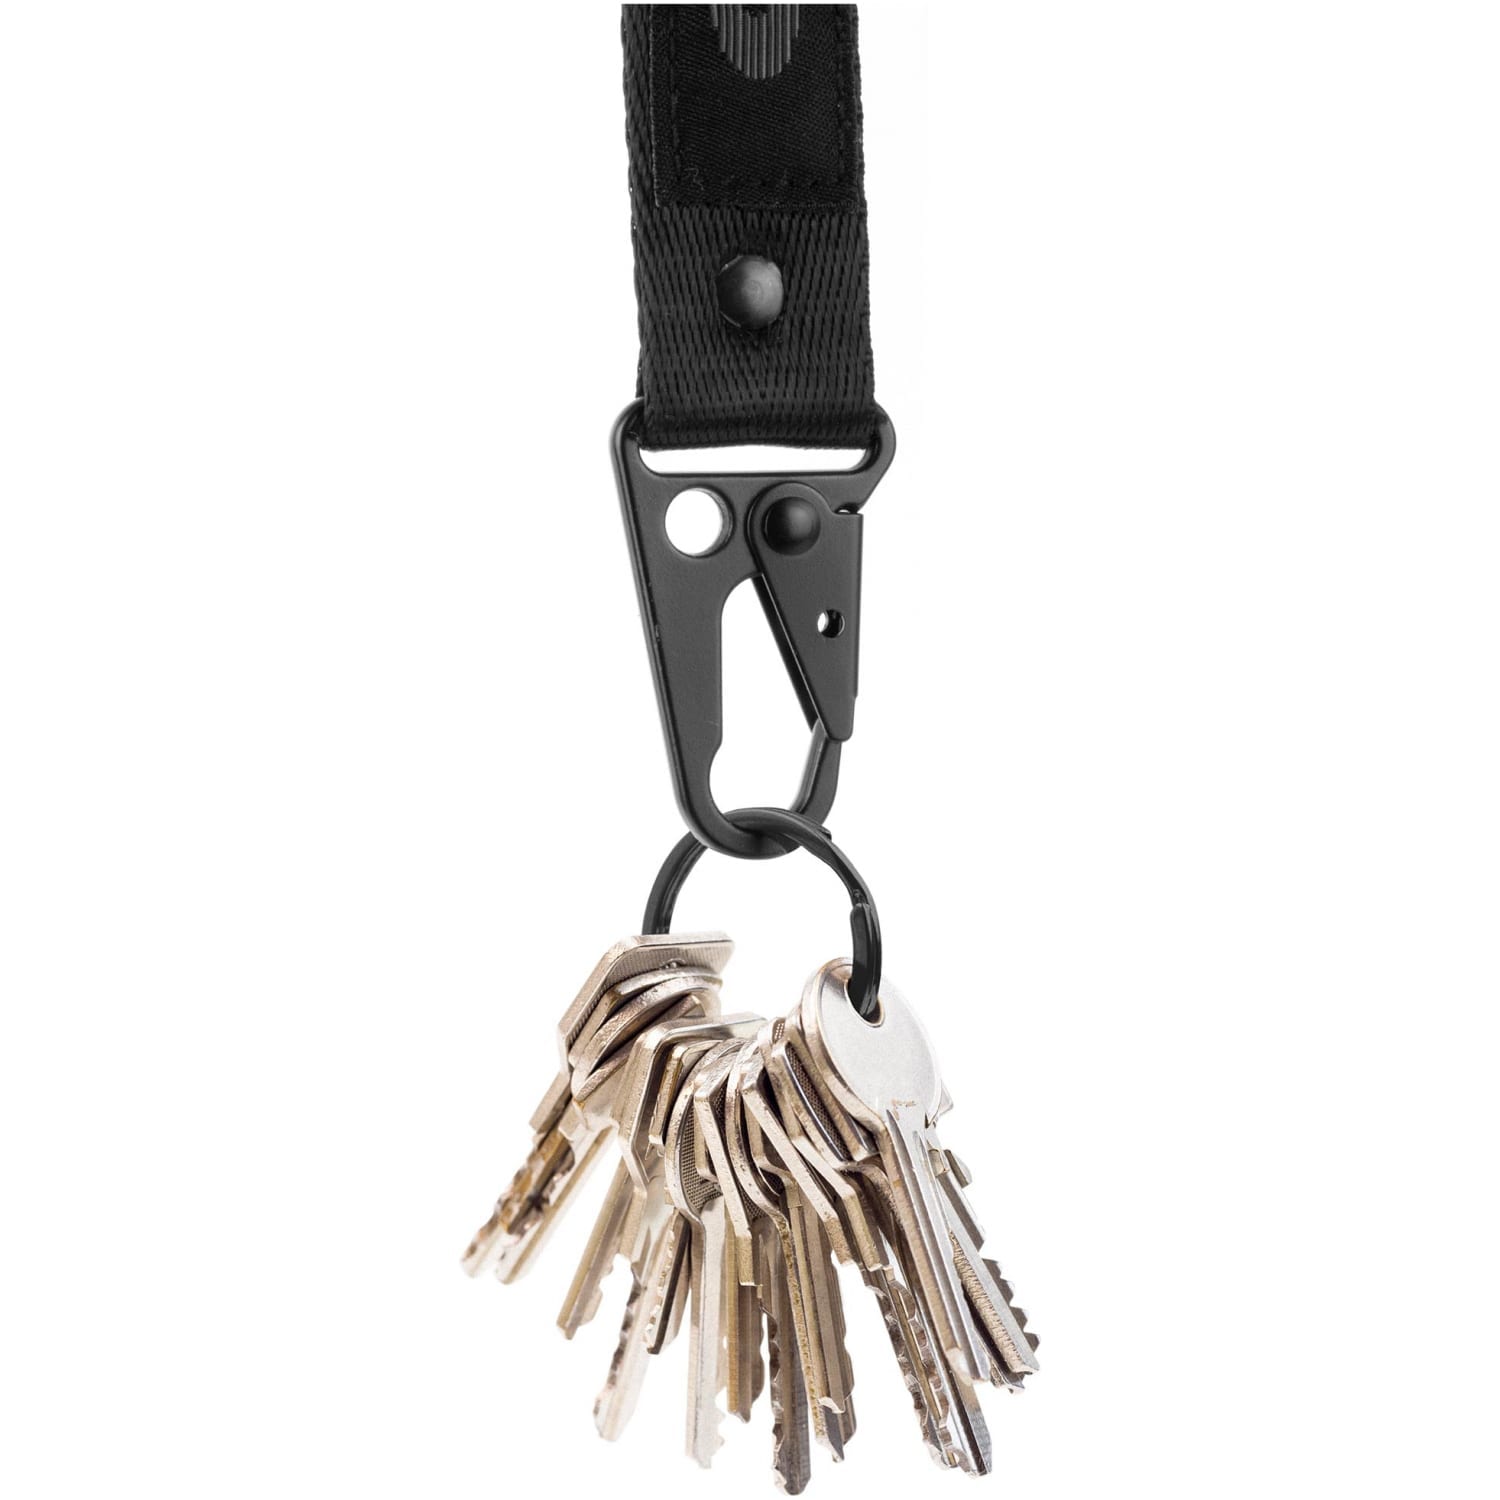 Promotional Customized Magnum Heavy Duty Key Chain Clip-On Wrist Strap